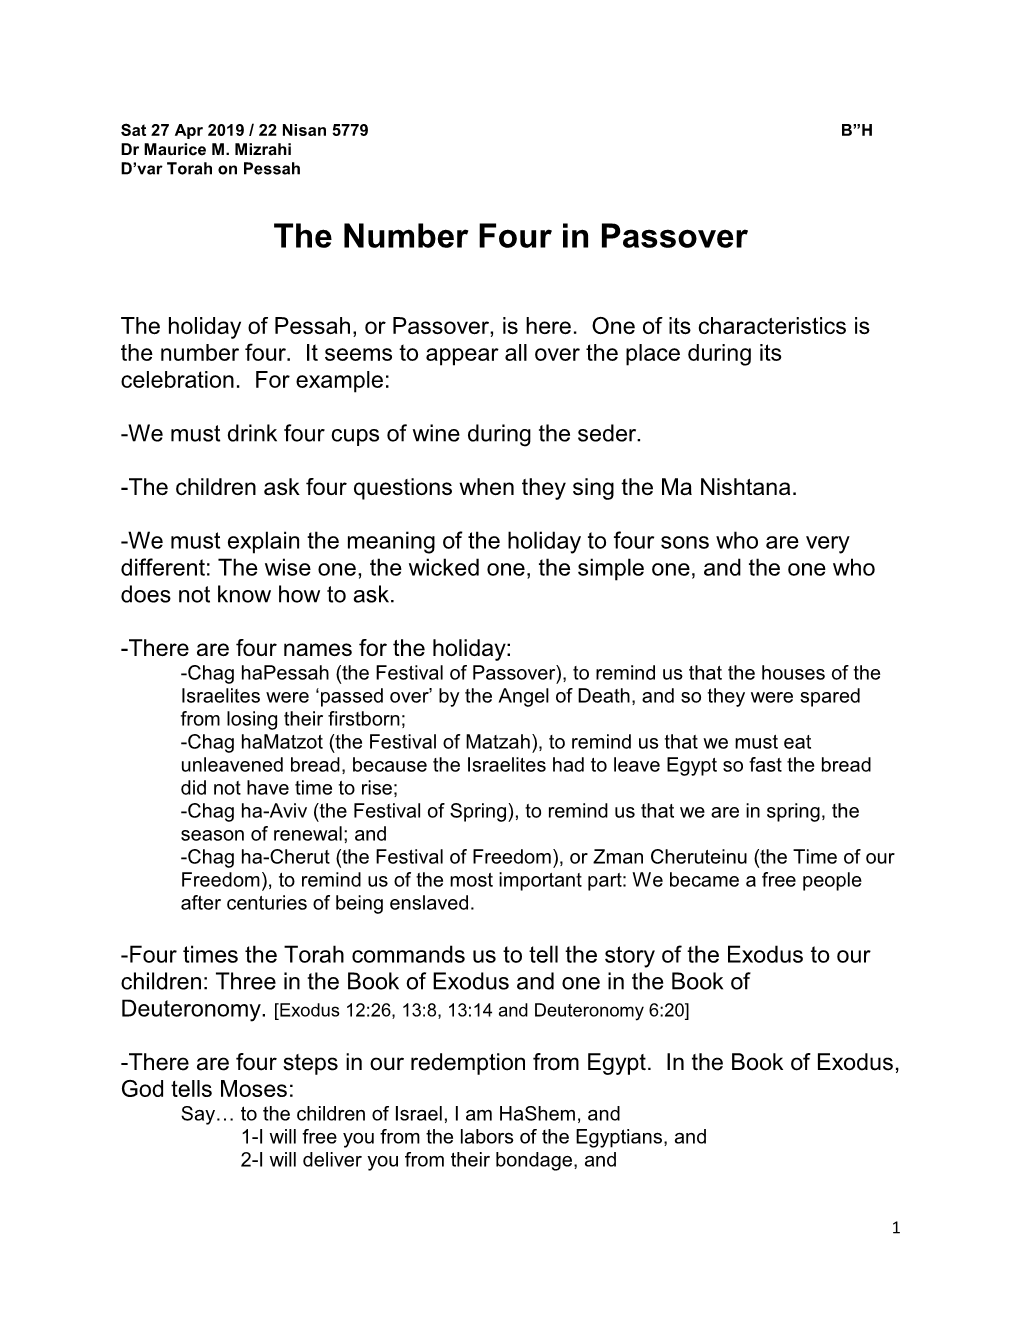 The Number Four in Passover (Pessah)